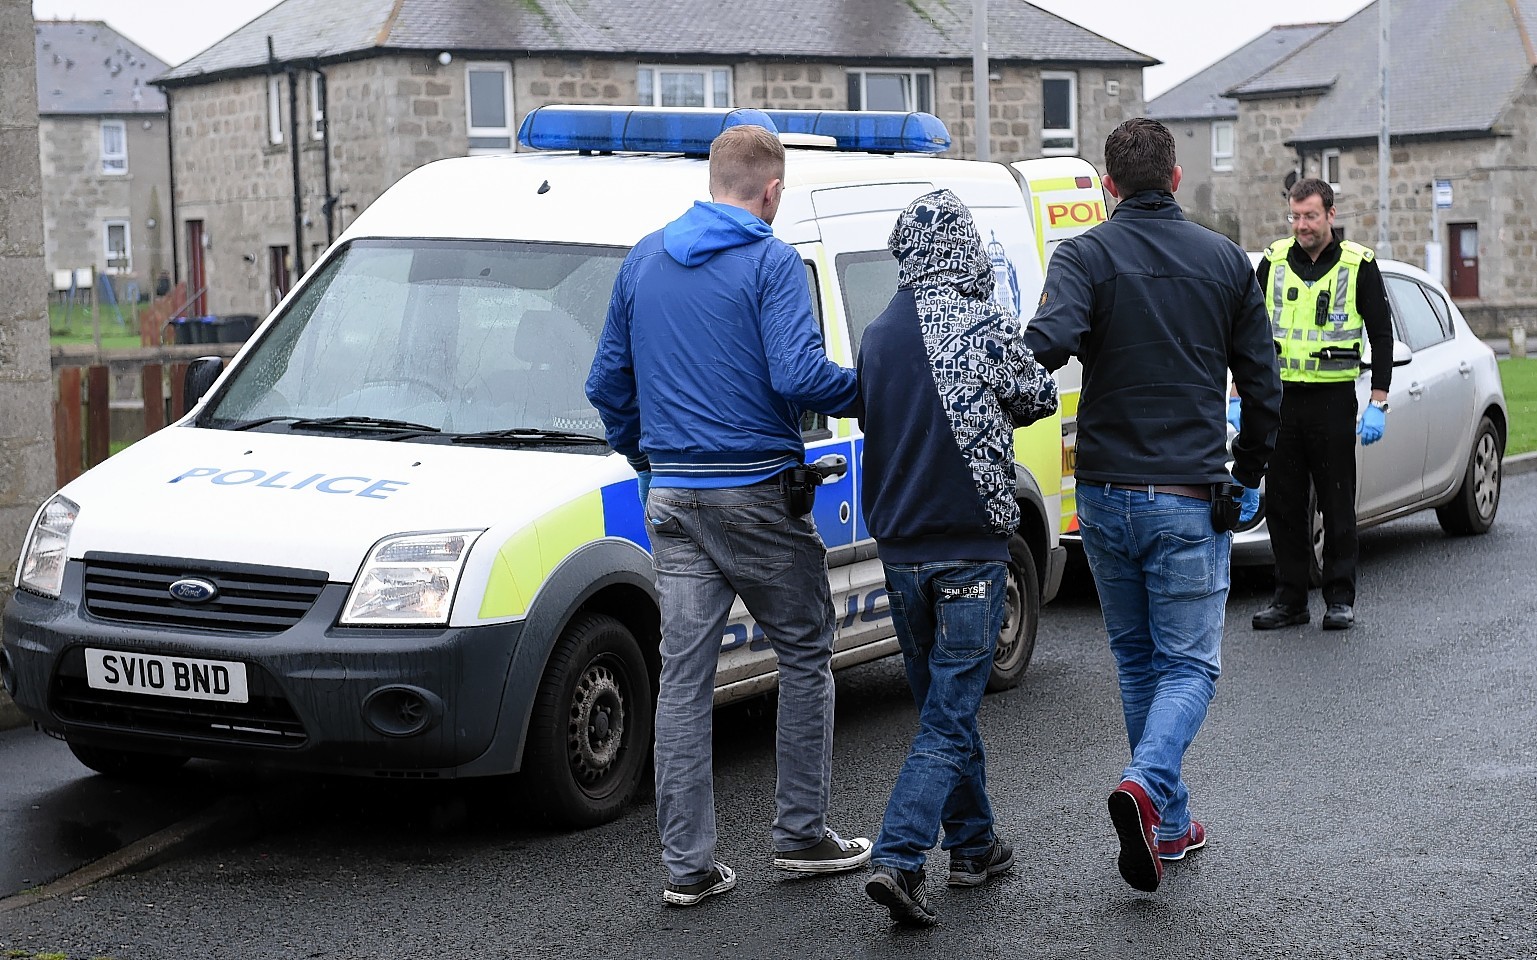 Police lead a suspect away following one of the raids